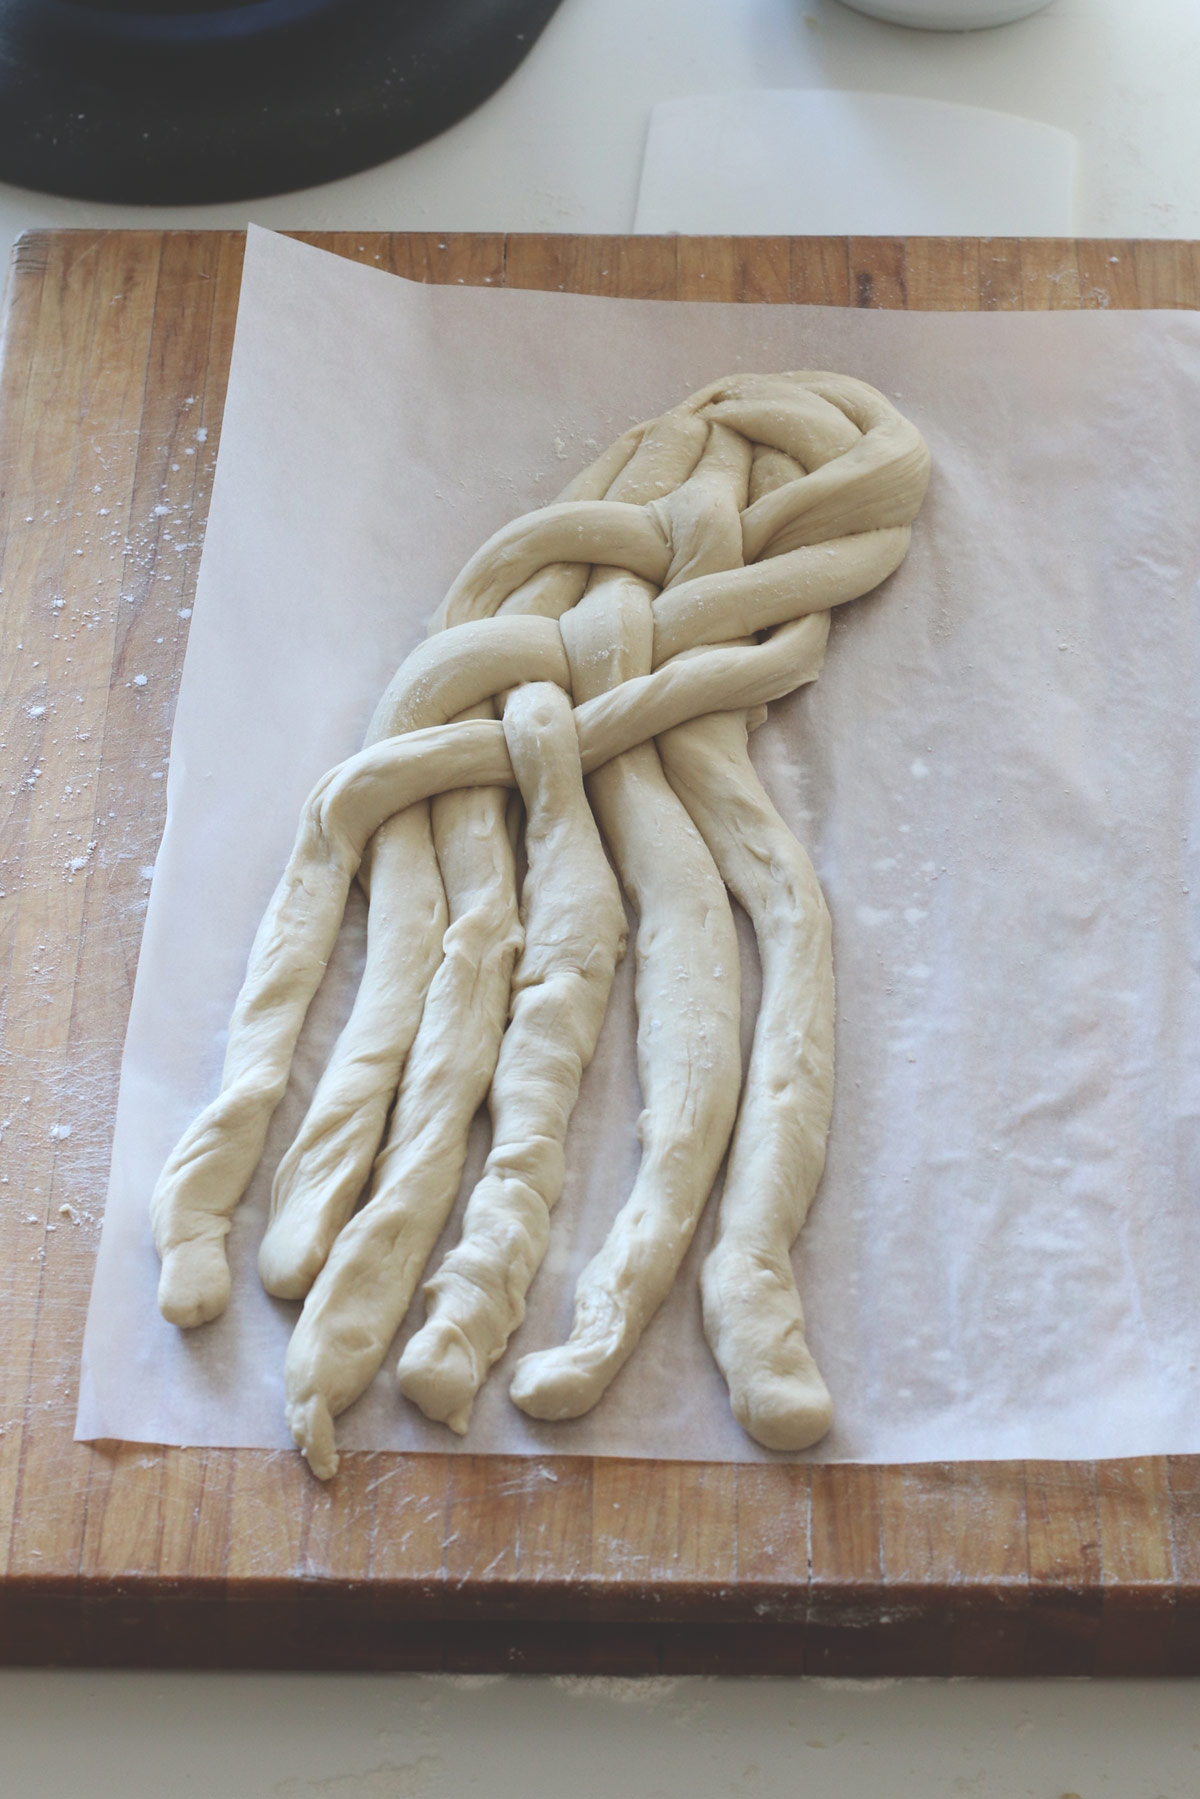 How-to braid bread